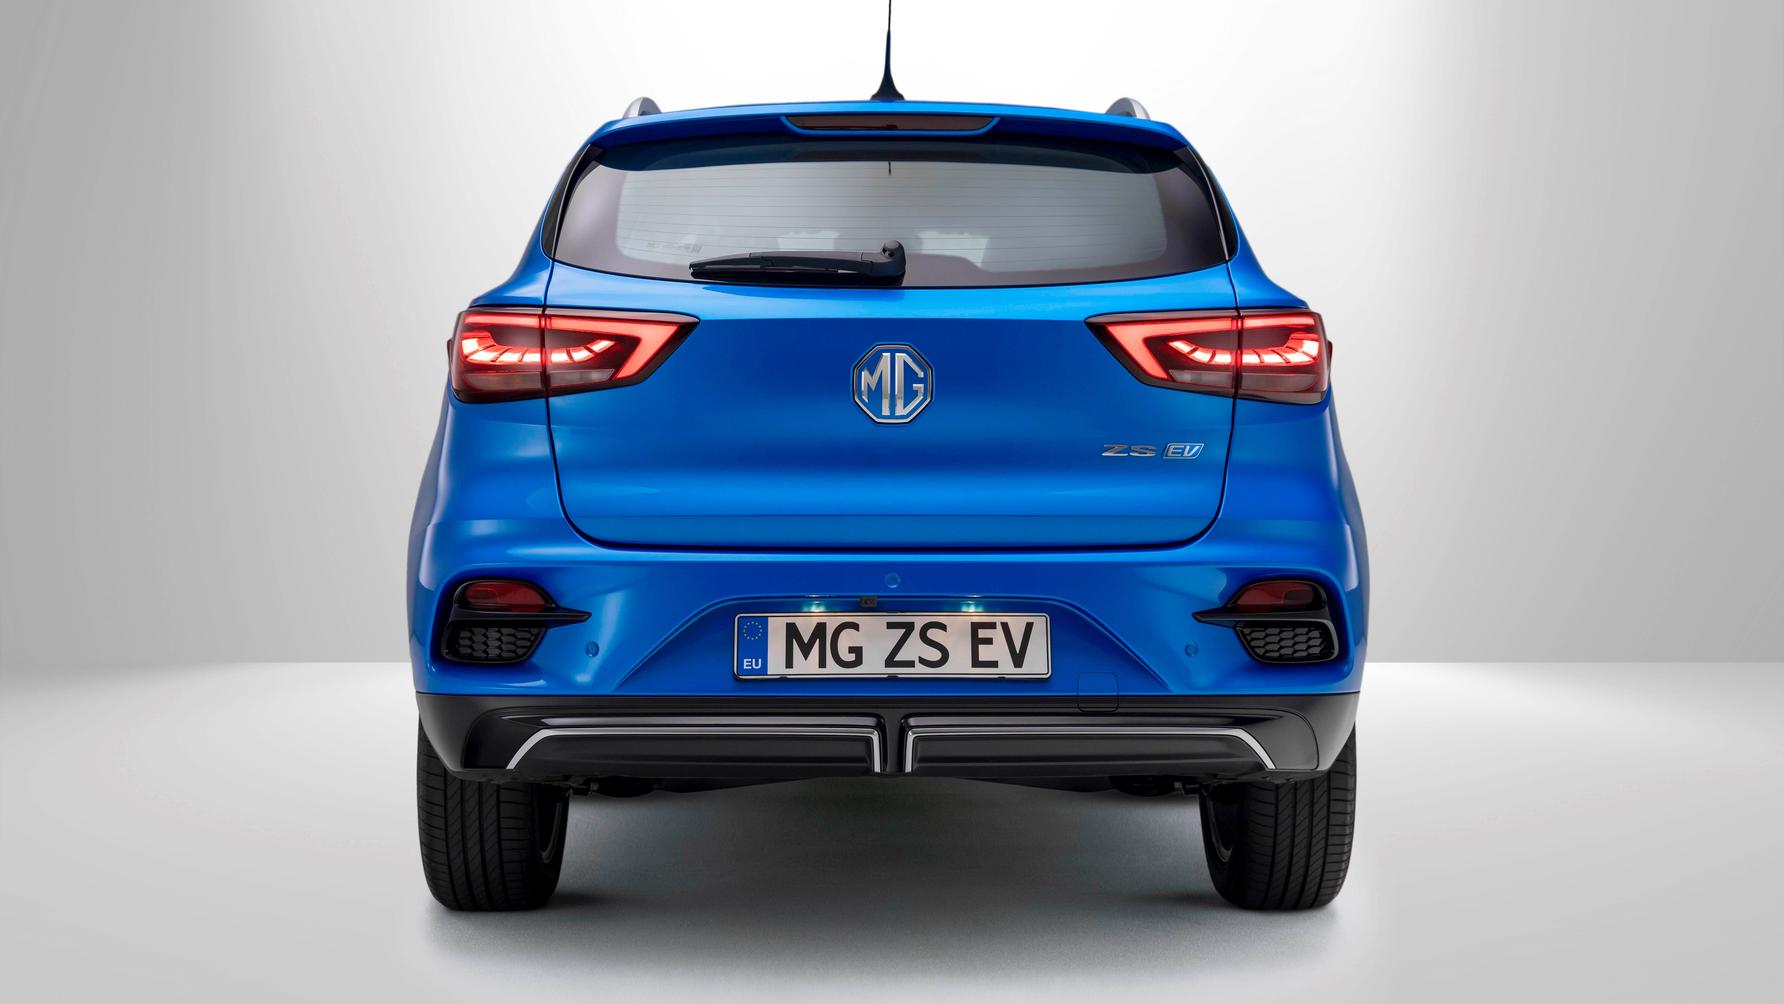 Back view of the 2022 MG ZS EV